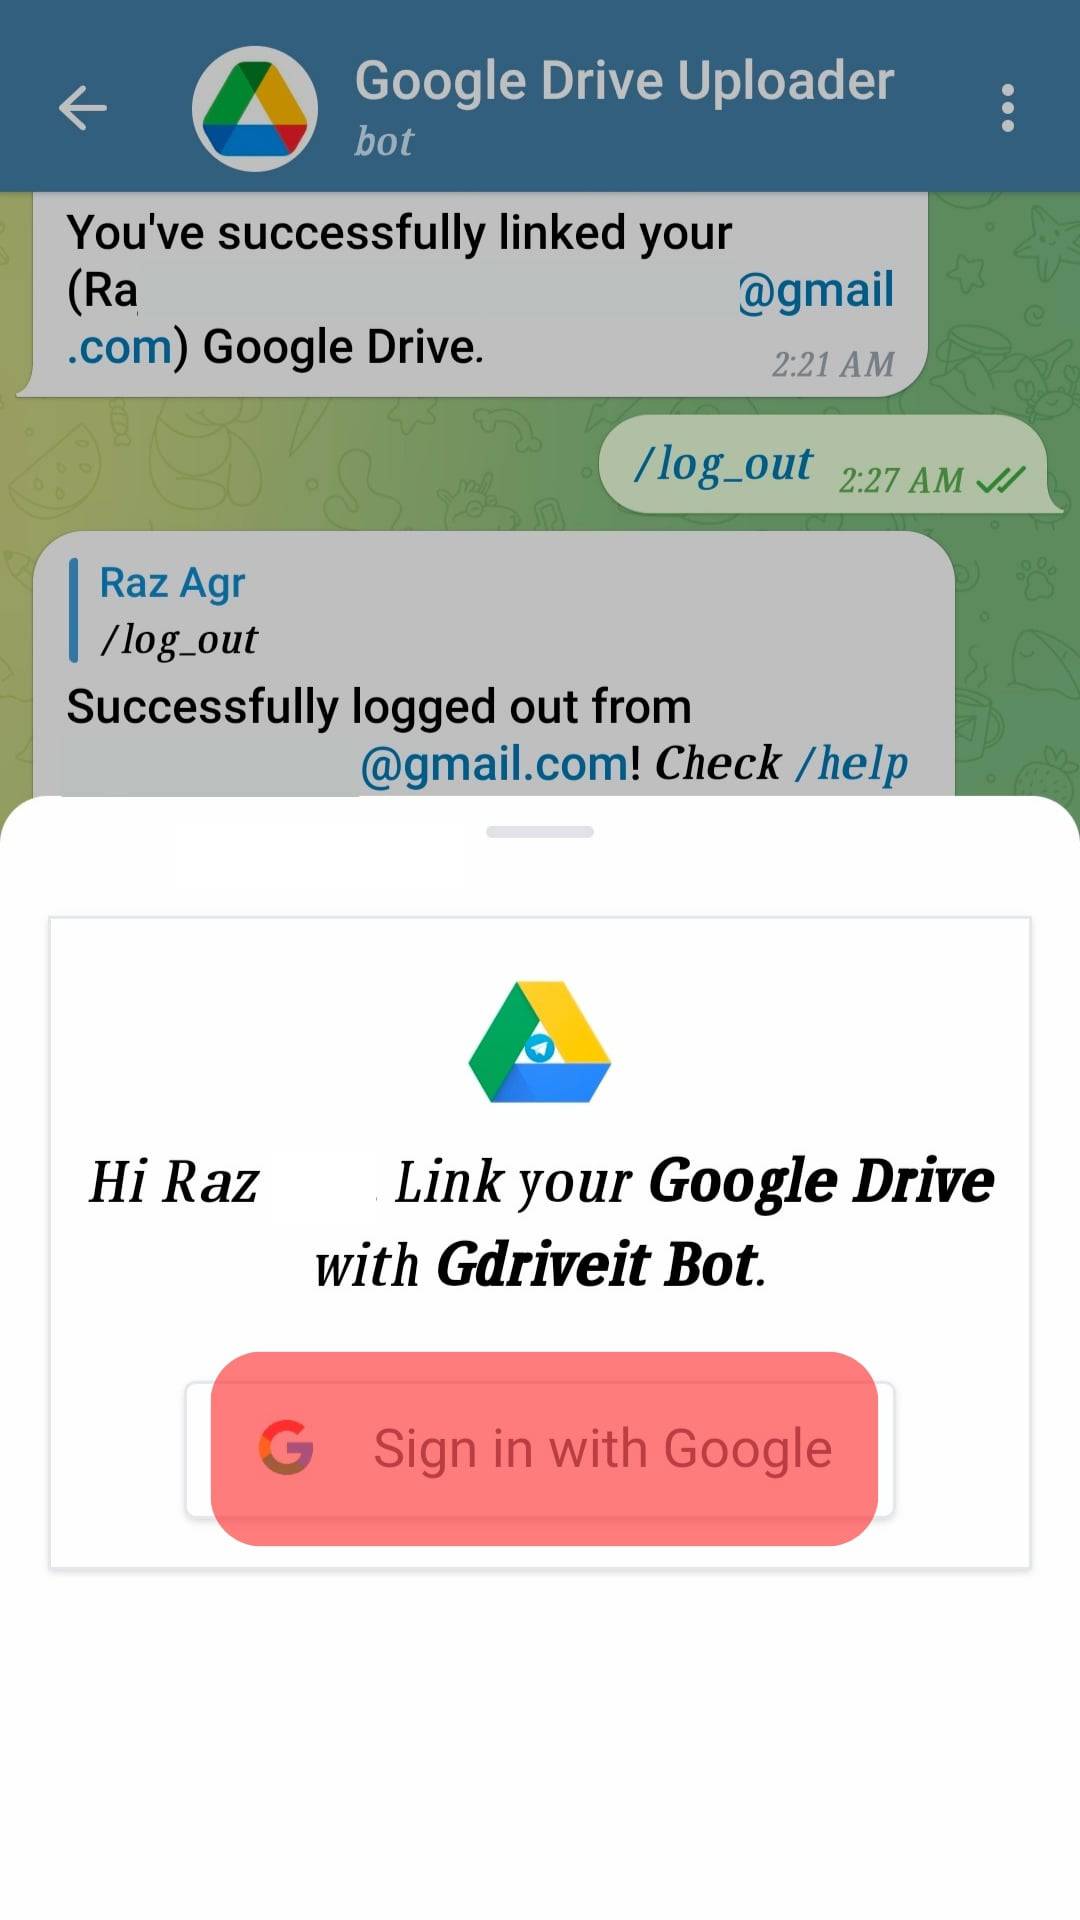 Sign In To Your Google Account